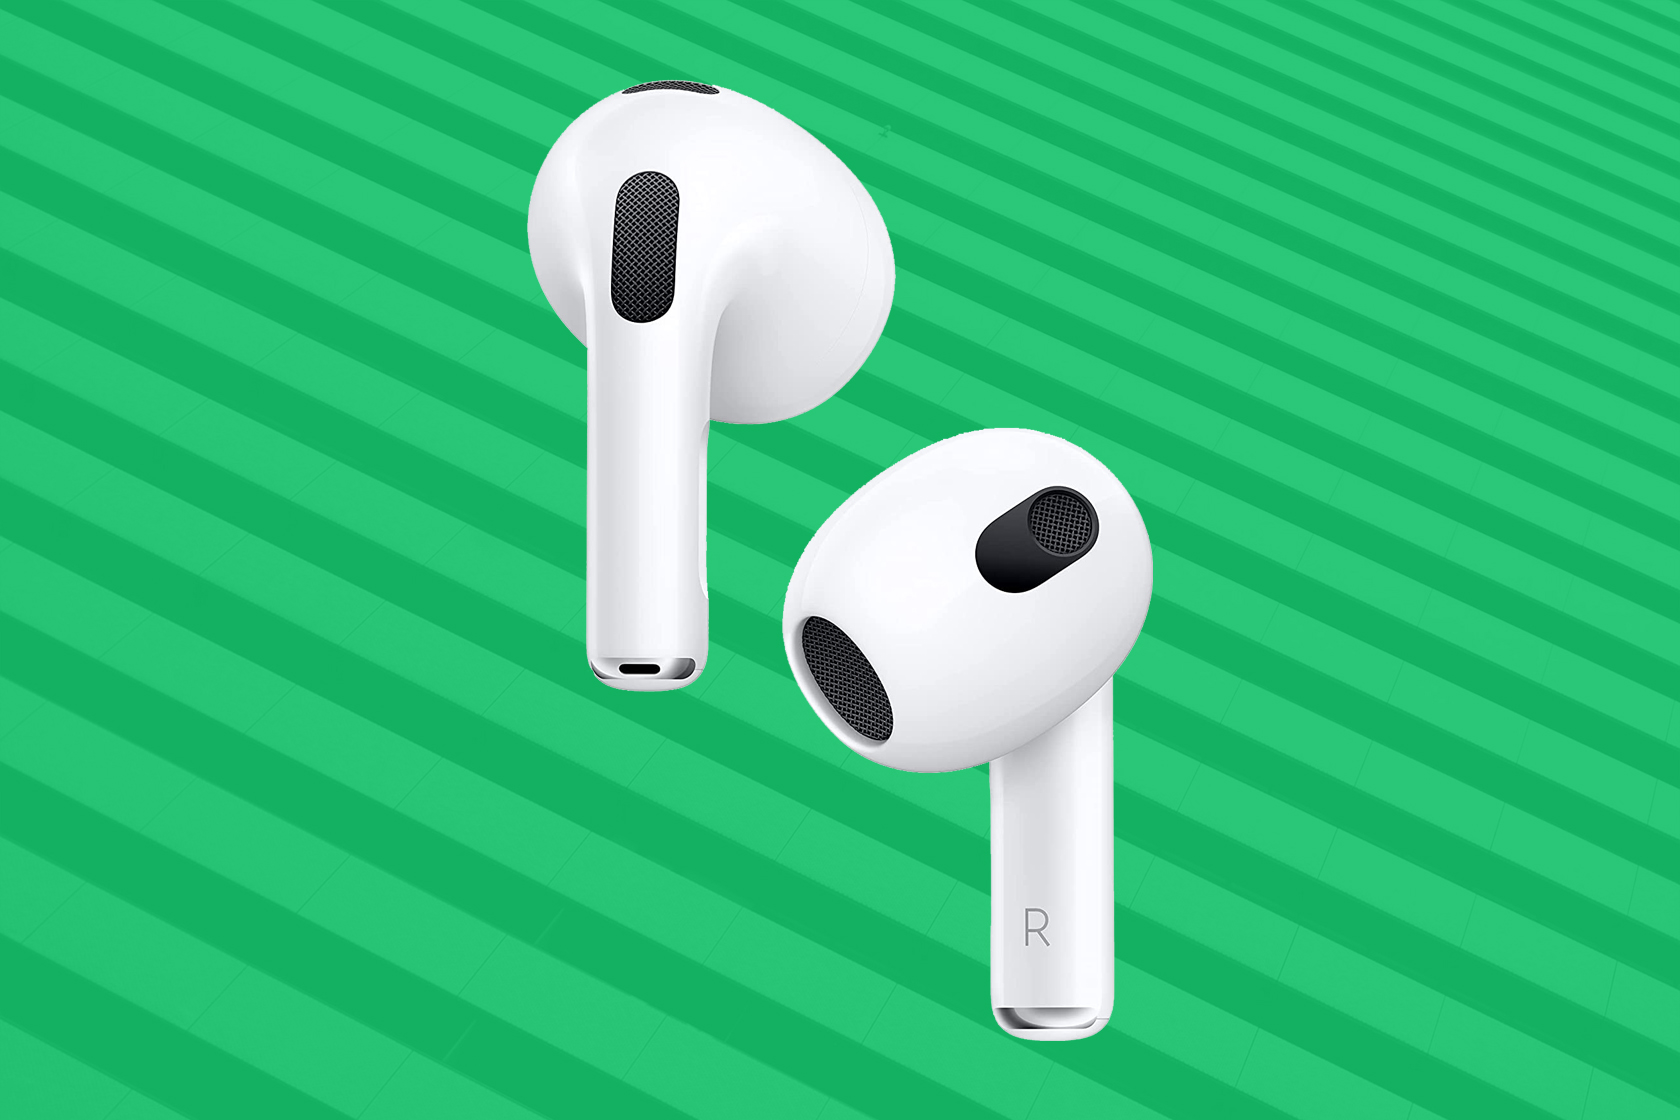 apple-s-3rd-generation-airpods-are-down-to-140-on-amazon